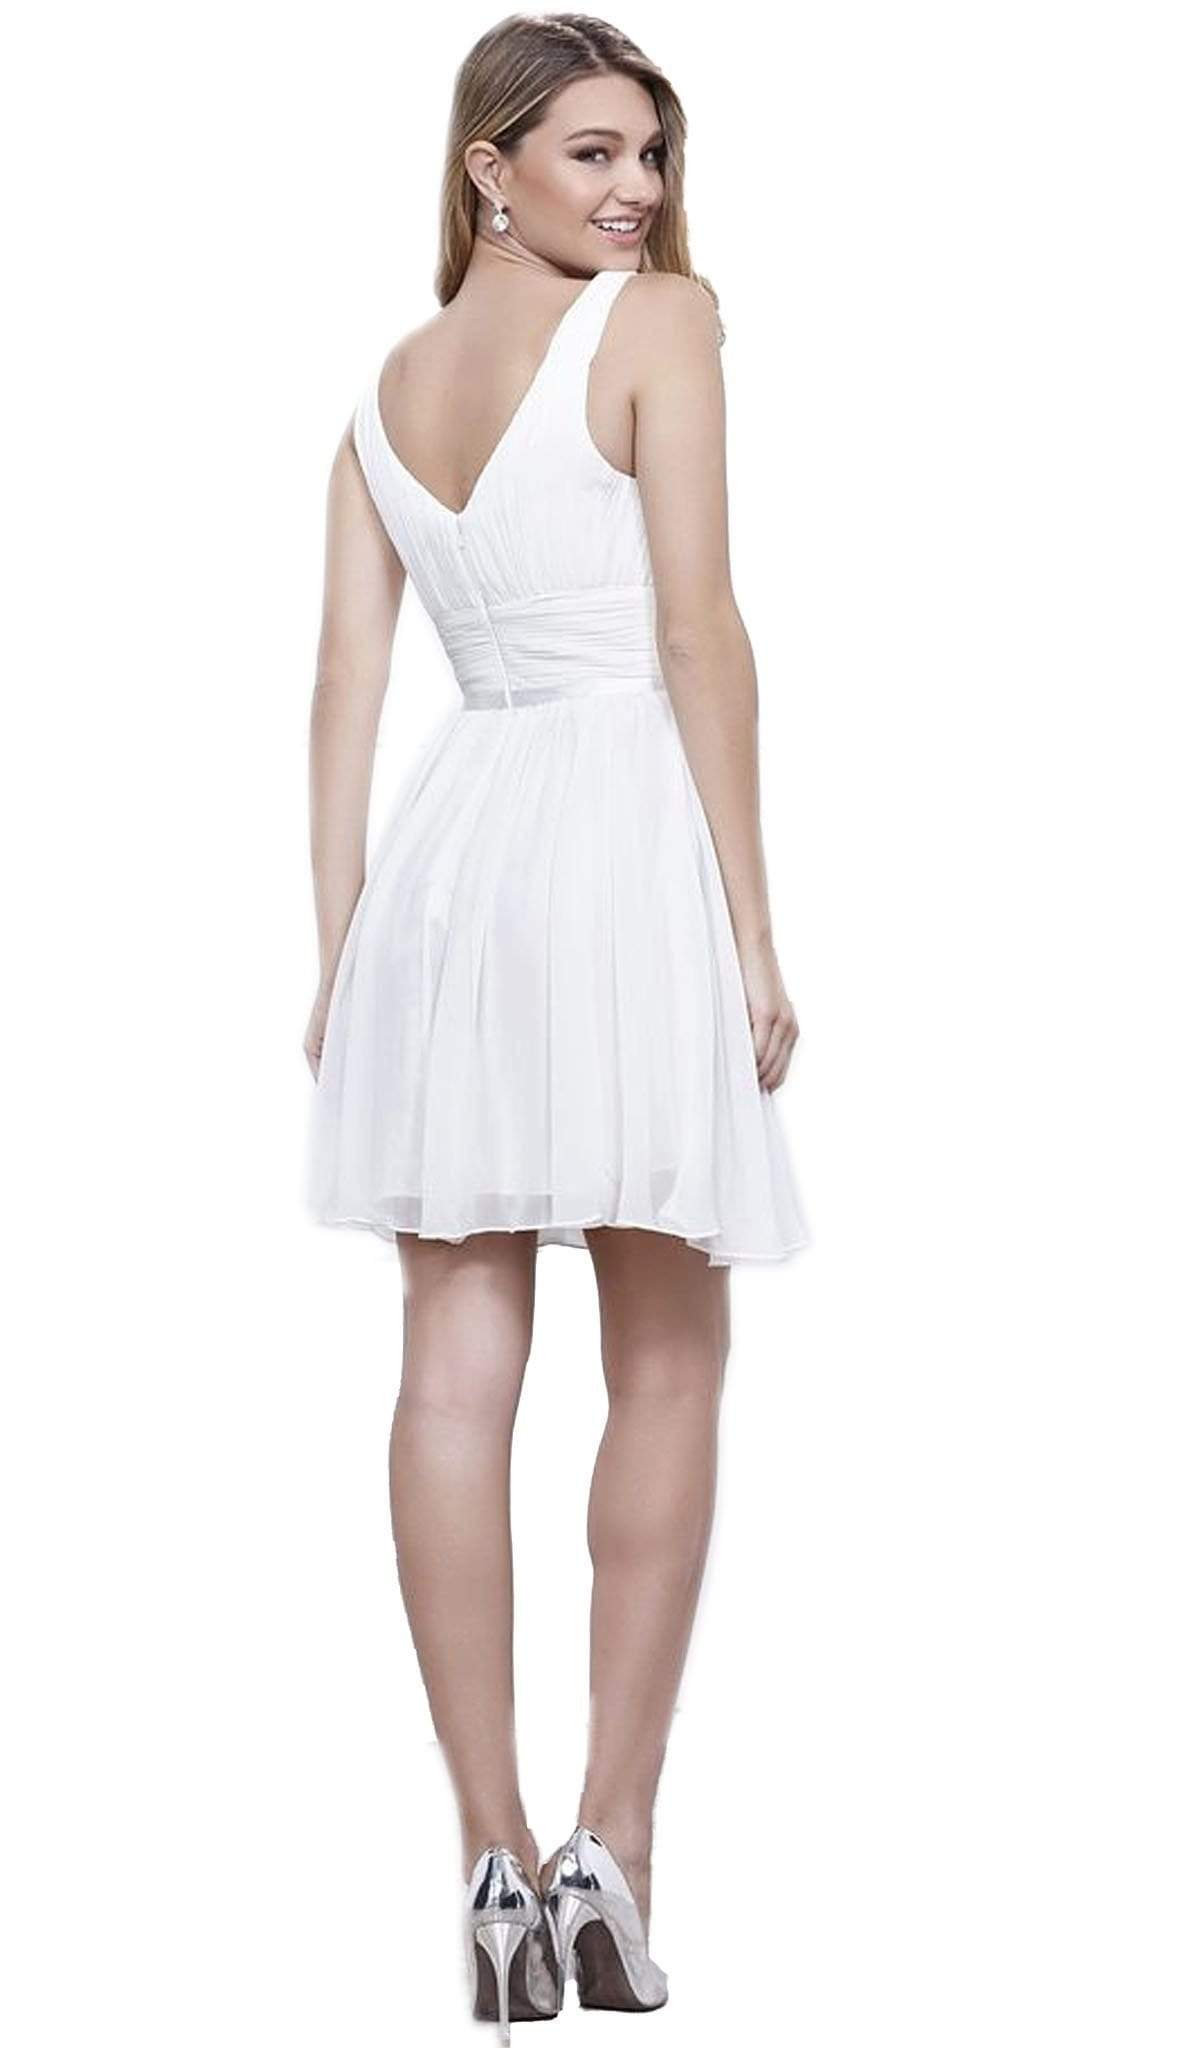 Nox Anabel - 6242 Ruched V-Neck A-line Cocktail Dress Special Occasion Dress